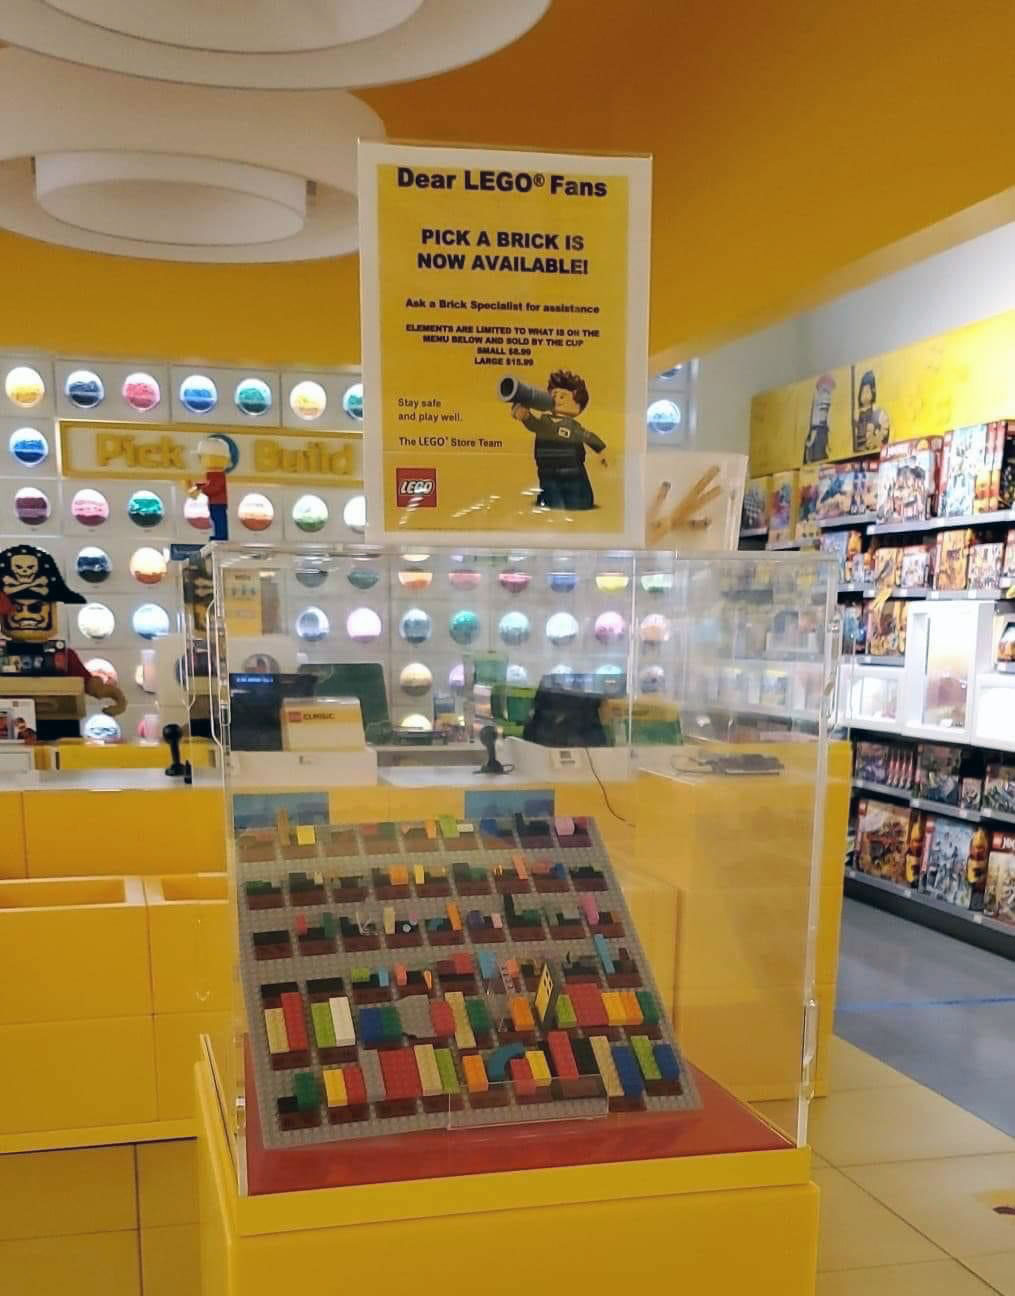 - LEGO Brand Are Implementing Service!